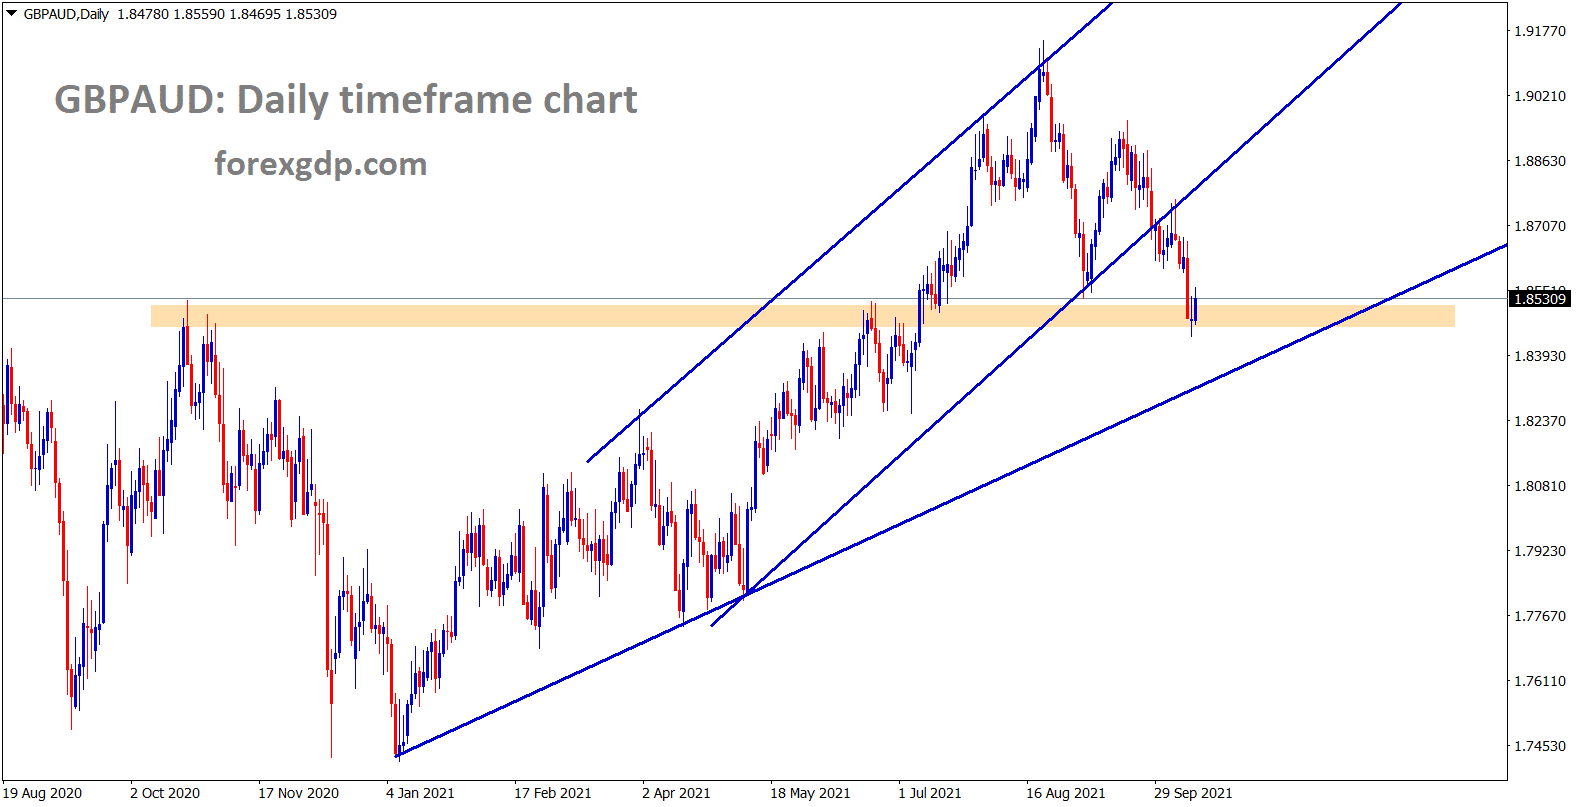 GBPAUD has reached the previous horizontal resistance area and trying to make a correction